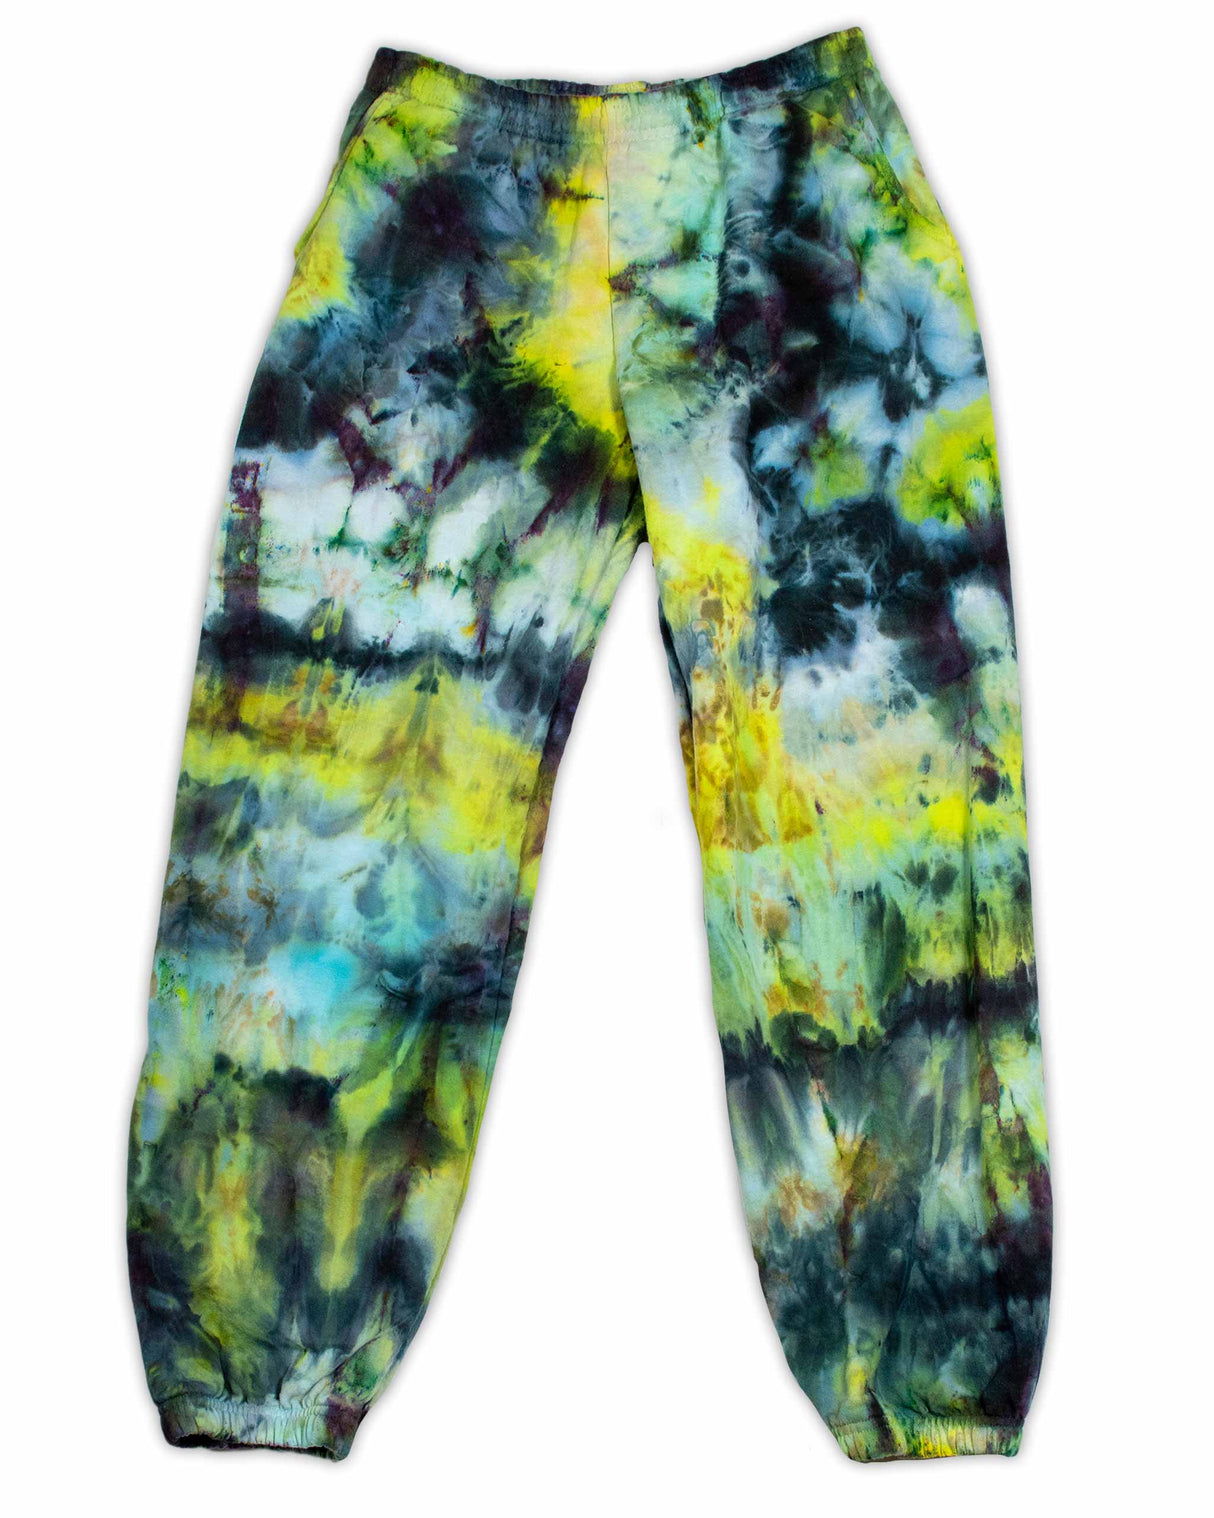 A pair of colorful sweatpants with a striking tie-dye pattern, presenting a kaleidoscopic effect with shades ranging from lime green to ocean blue and charcoal.